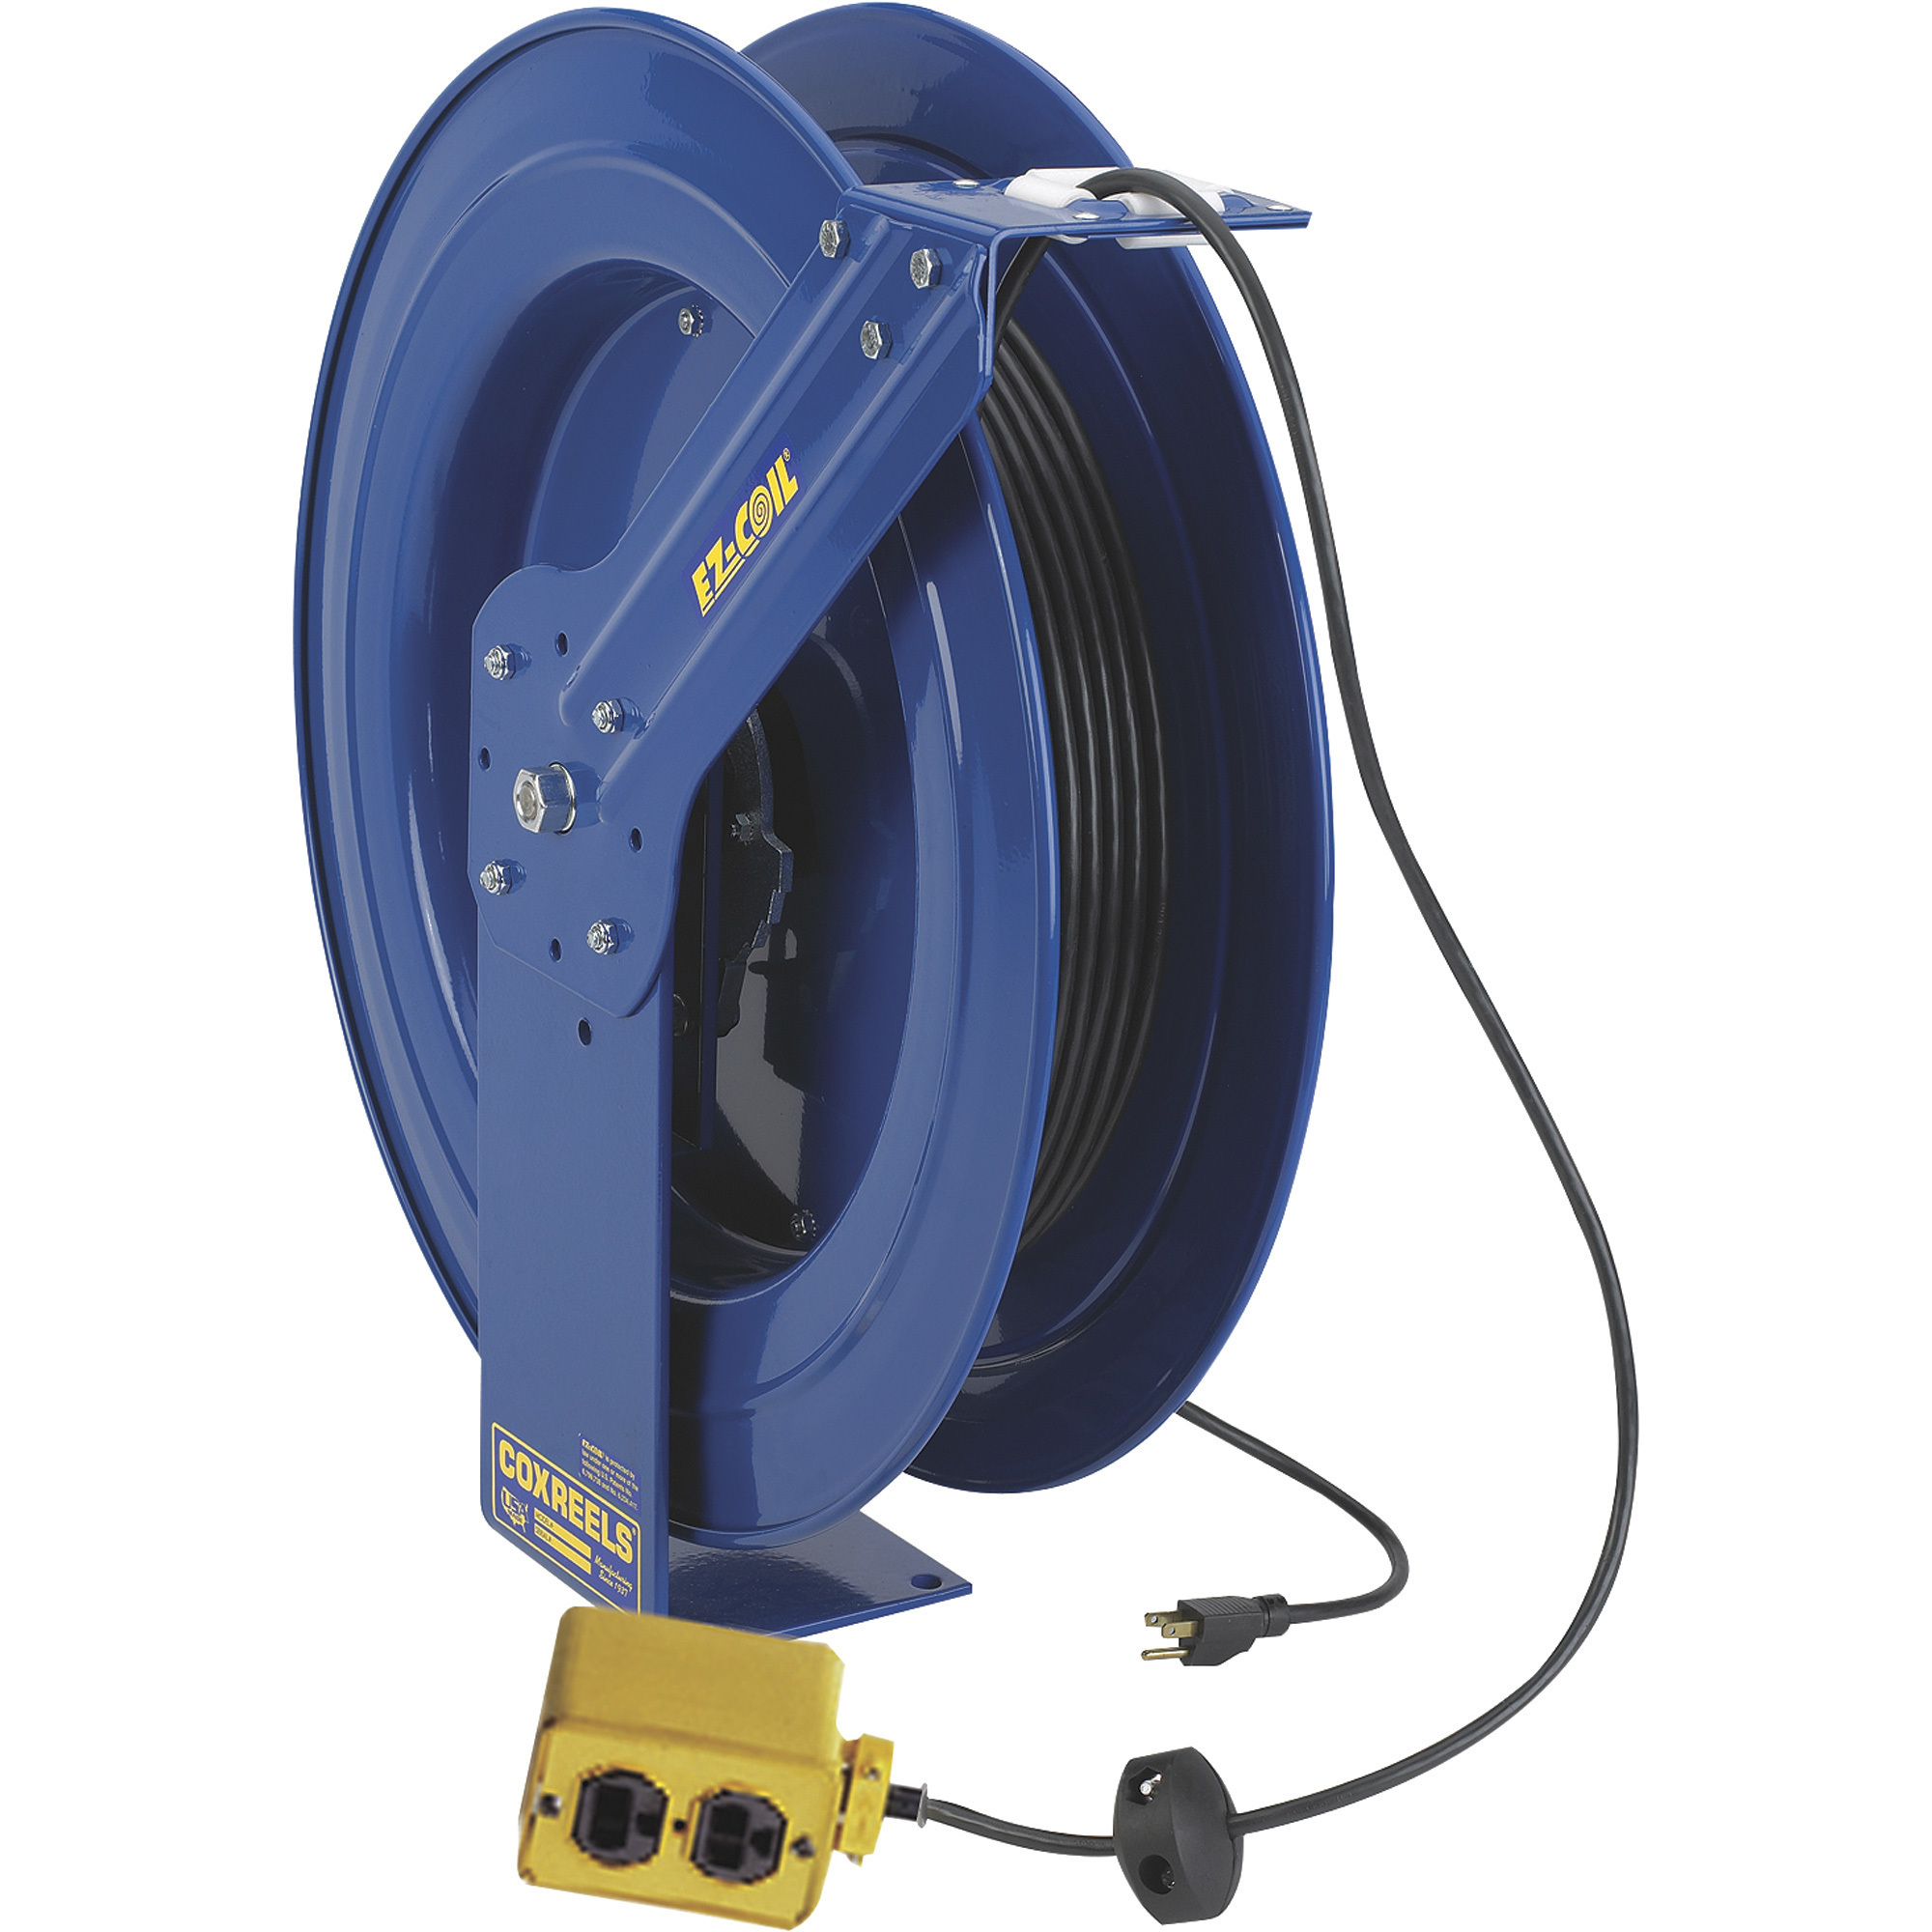 Coxreels EZ-Coil Safety Series Extension Cord Reel with Quad Receptacle, 100  Ft., 12/3 Cord with Quad Receptacle, Model# EZ-PC24-0012-B